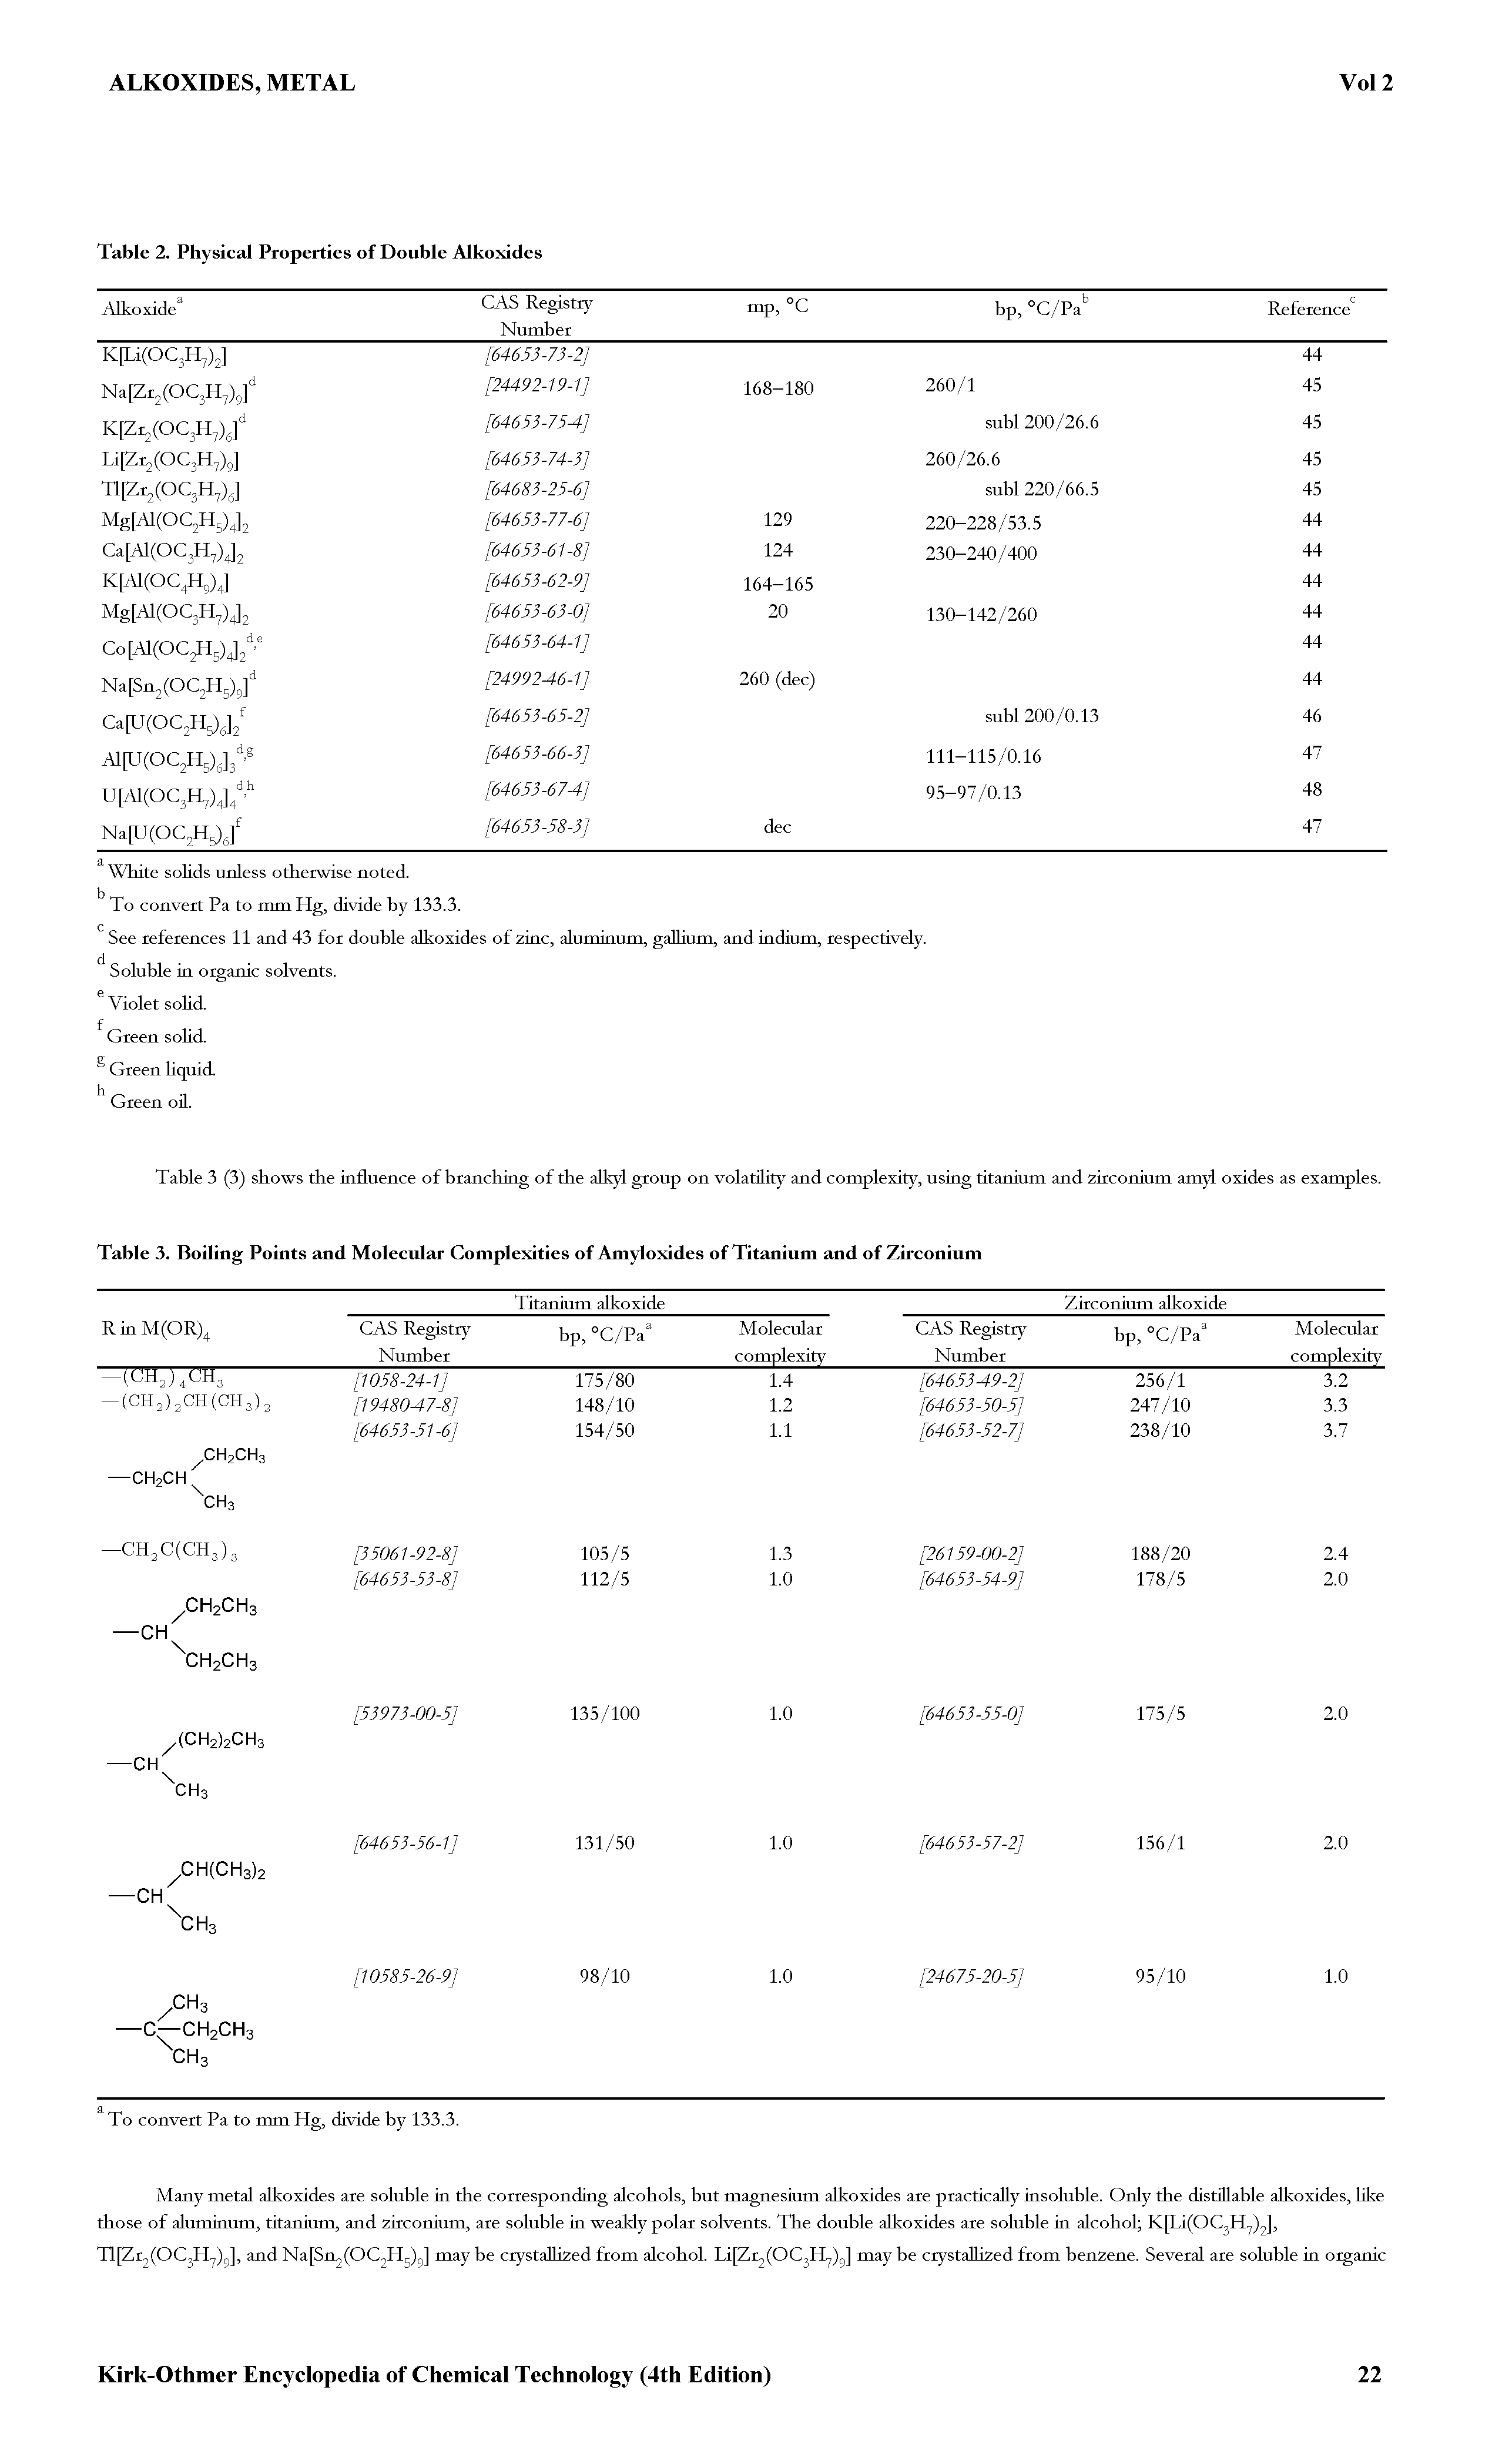 Table 3 (3) shows the influence of branching of the alkyl group on volatility and complexity, usiag titanium and zirconium amyl oxides as examples. Table 3. Boiling Points and Molecular Complexities of Amyloxides of Titanium and of Zirconium...